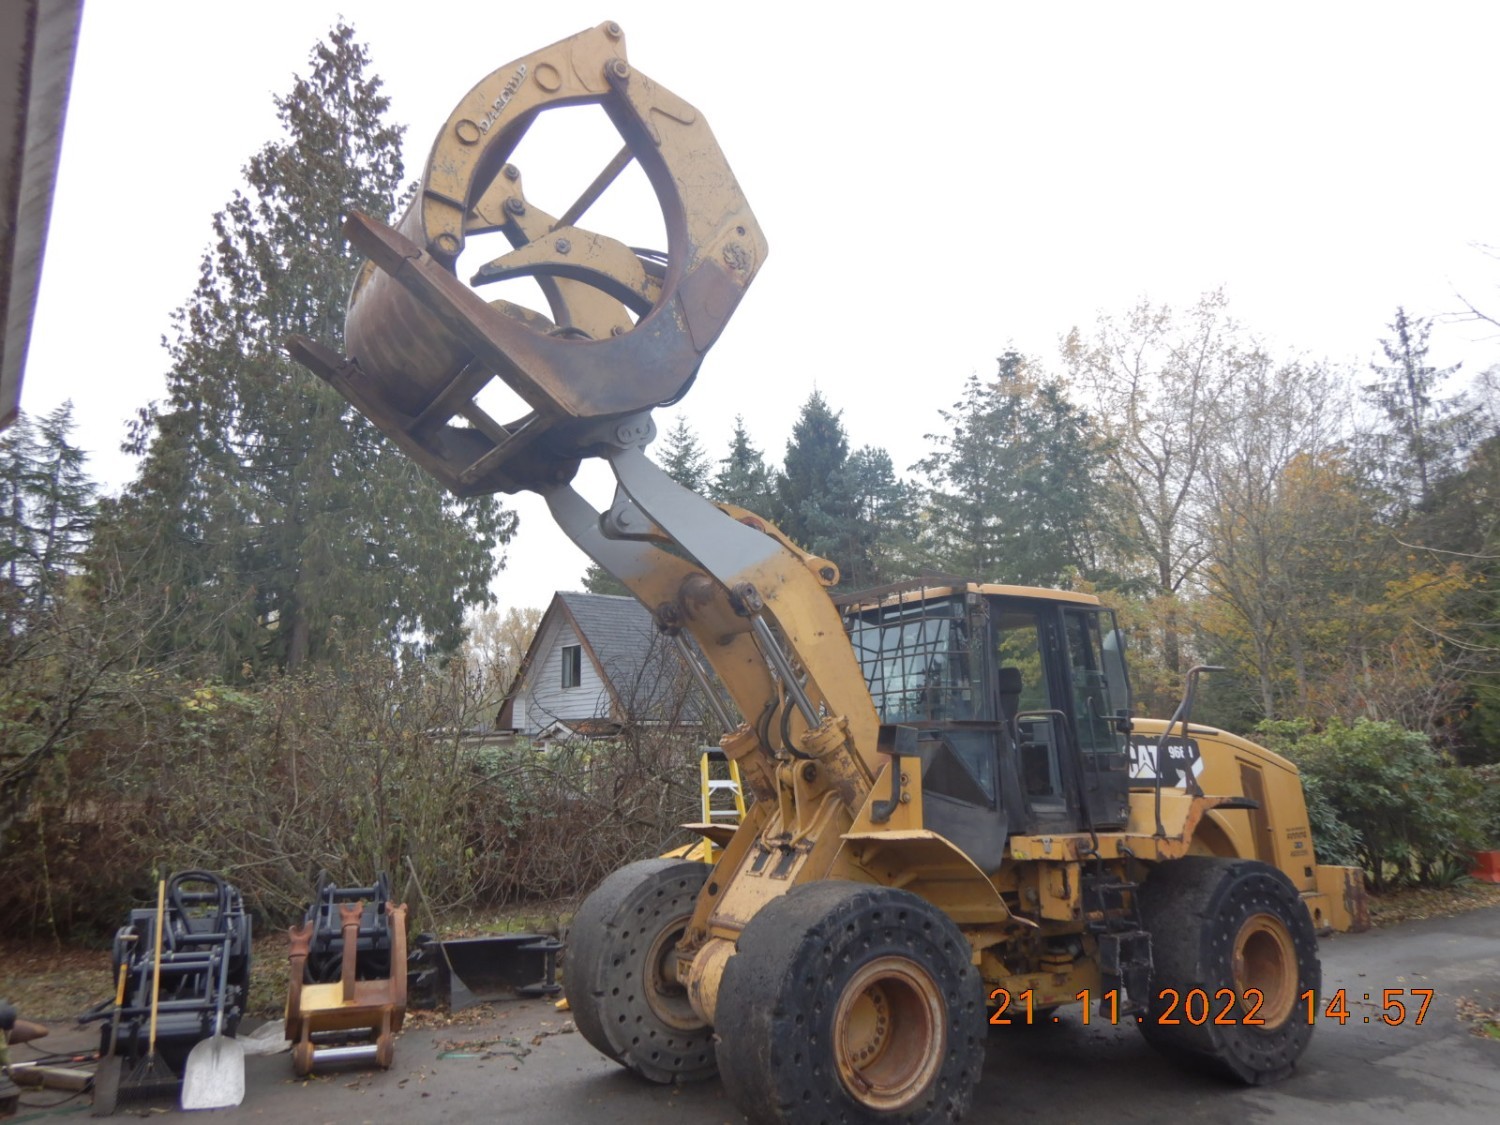 sold-2010-cat-966h-cw-custom-daequip-dual-log-or-pipe-grapple-with-internal-grapple-to-keep-pipe-logs-poles-secure-big-1